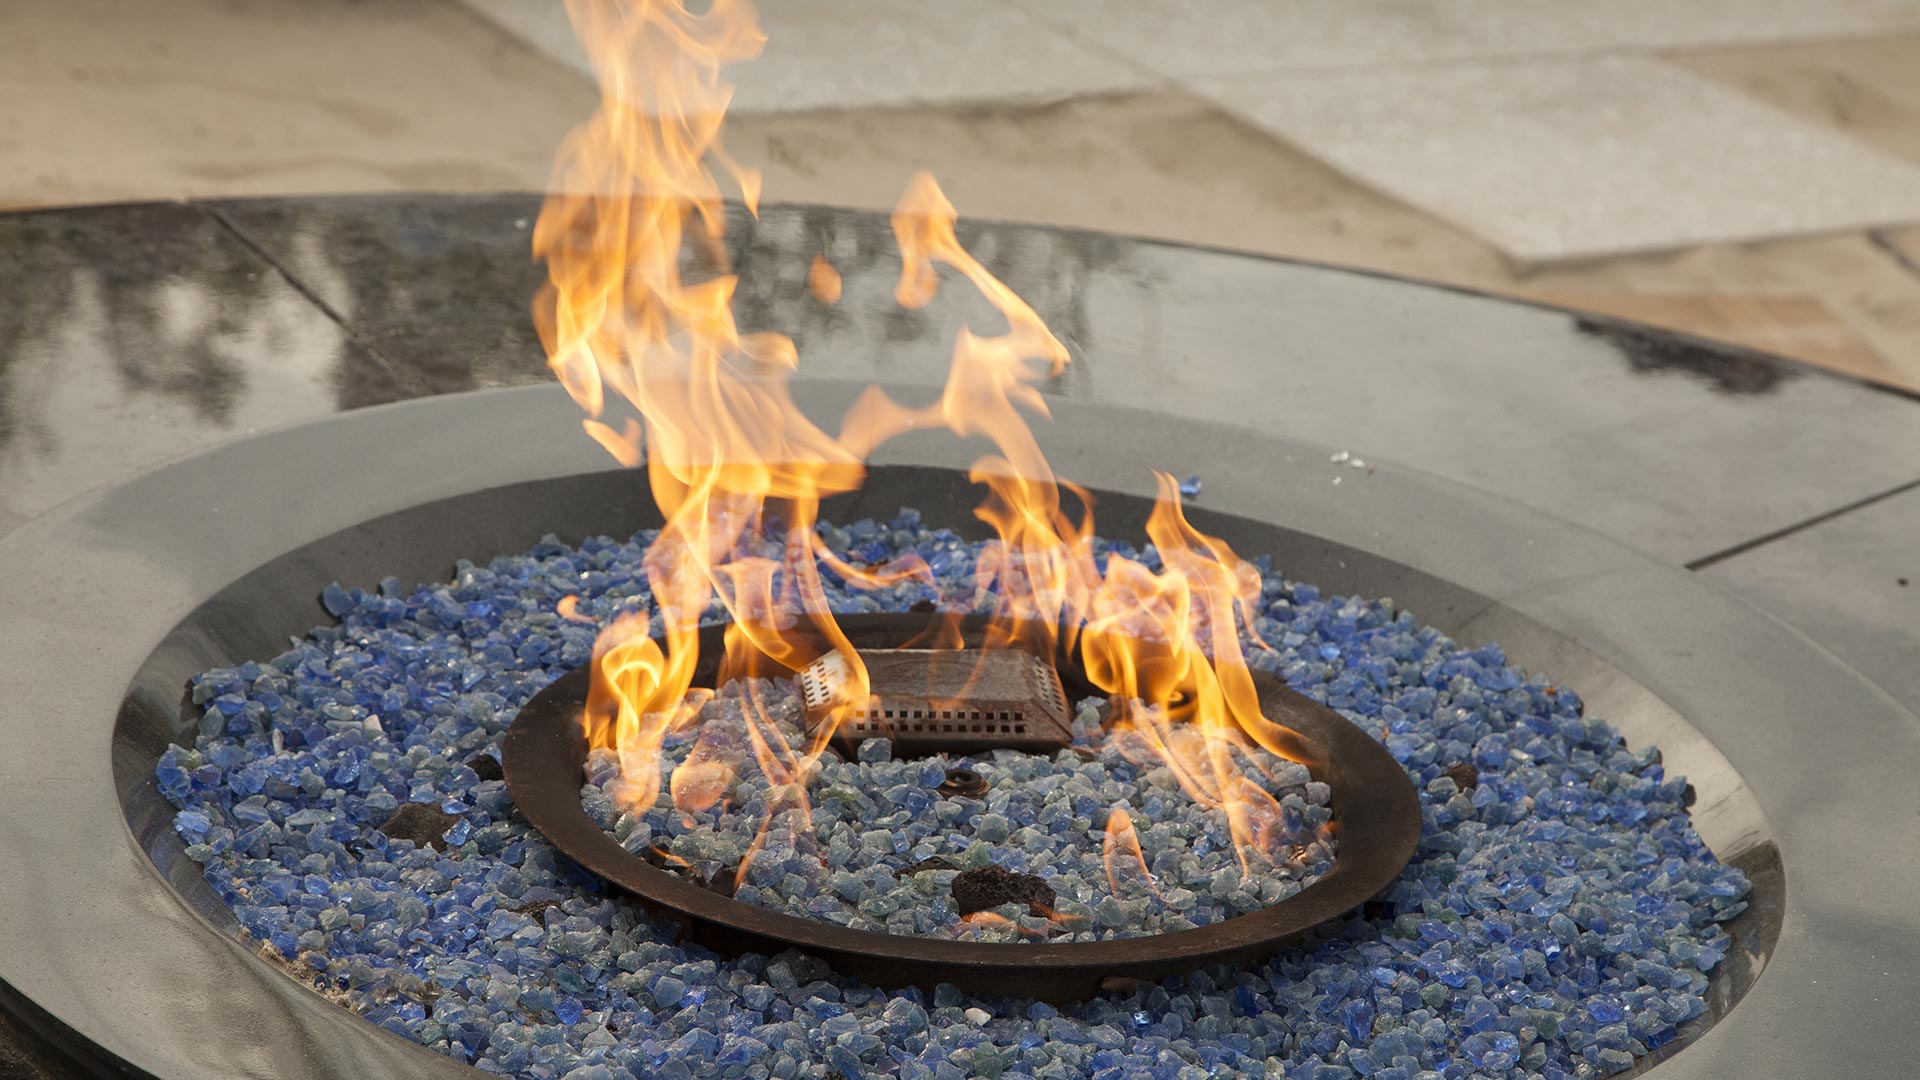 What's Better - A Fire Pit or an Outdoor Fireplace?